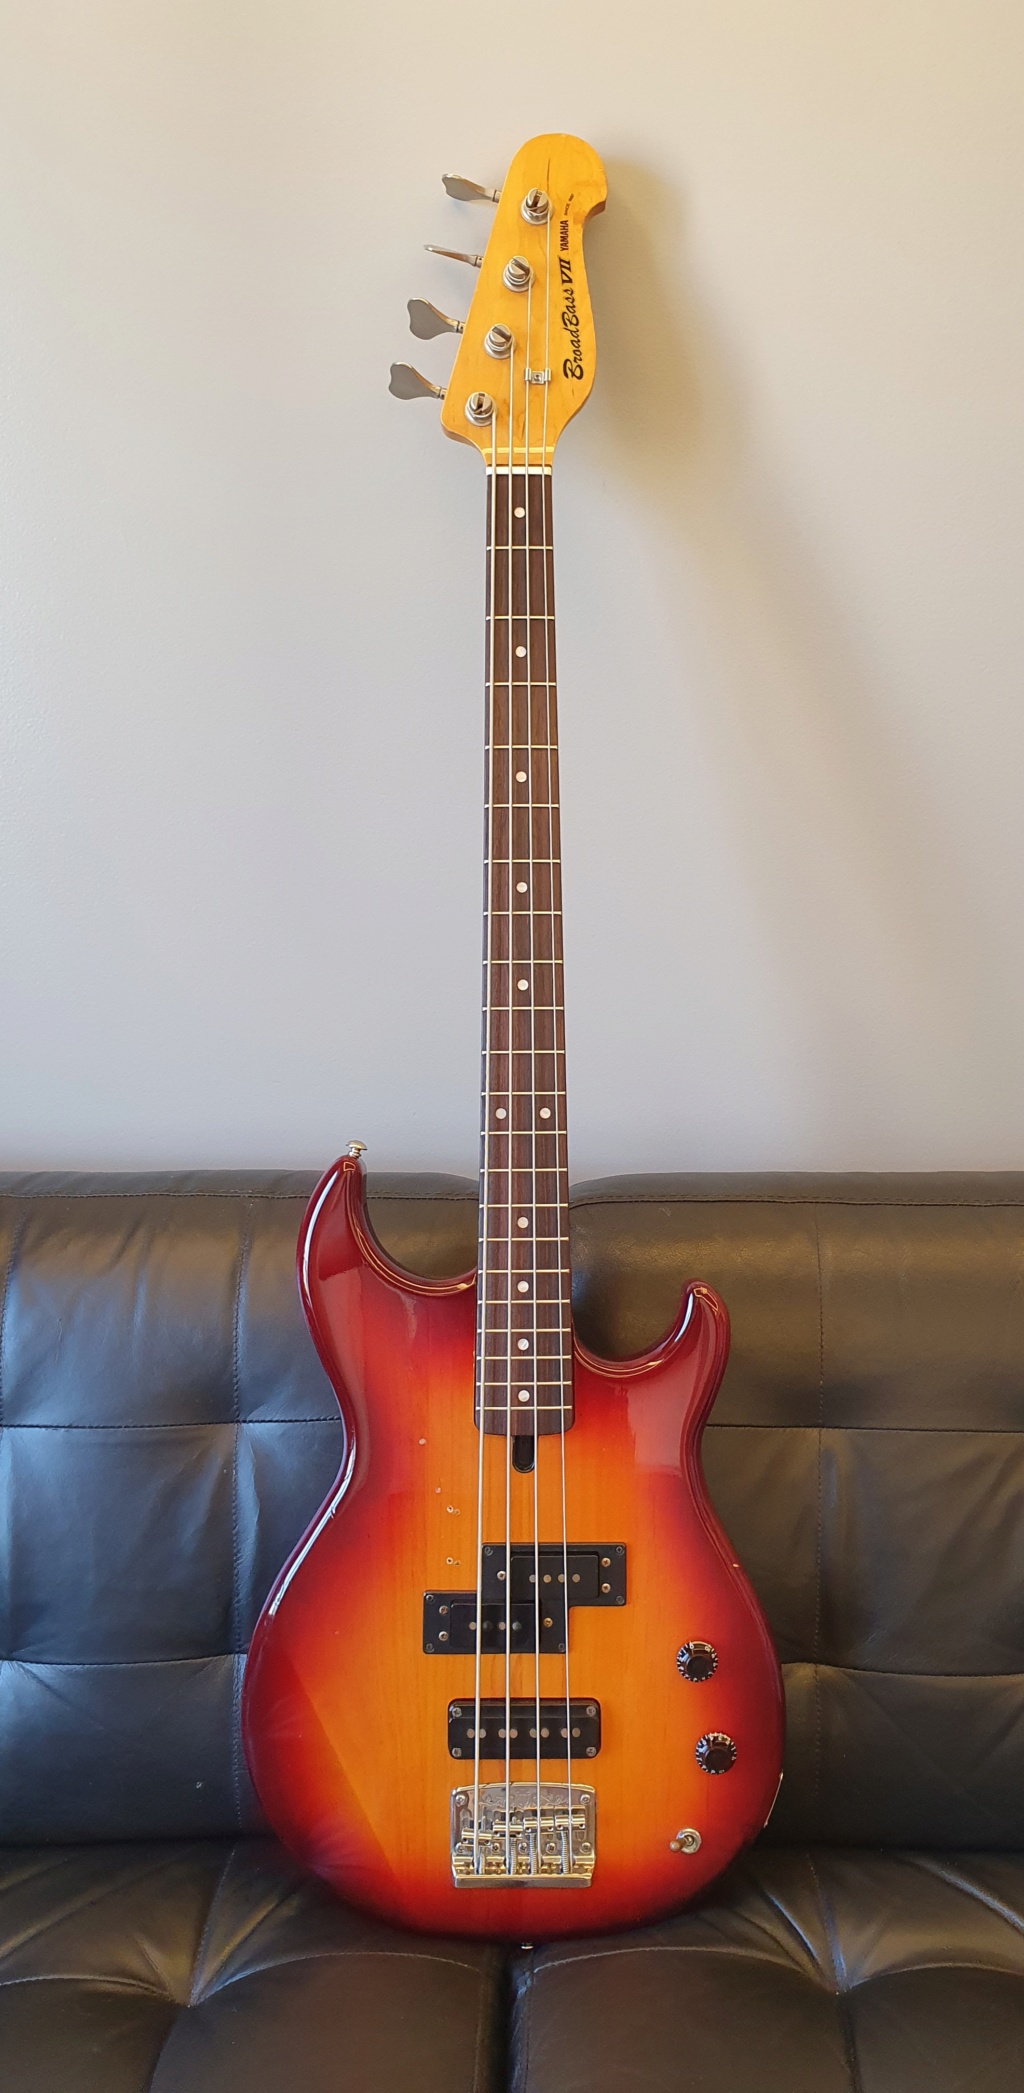 Clube Japanese Basses from the '80s - Página 5 20210510